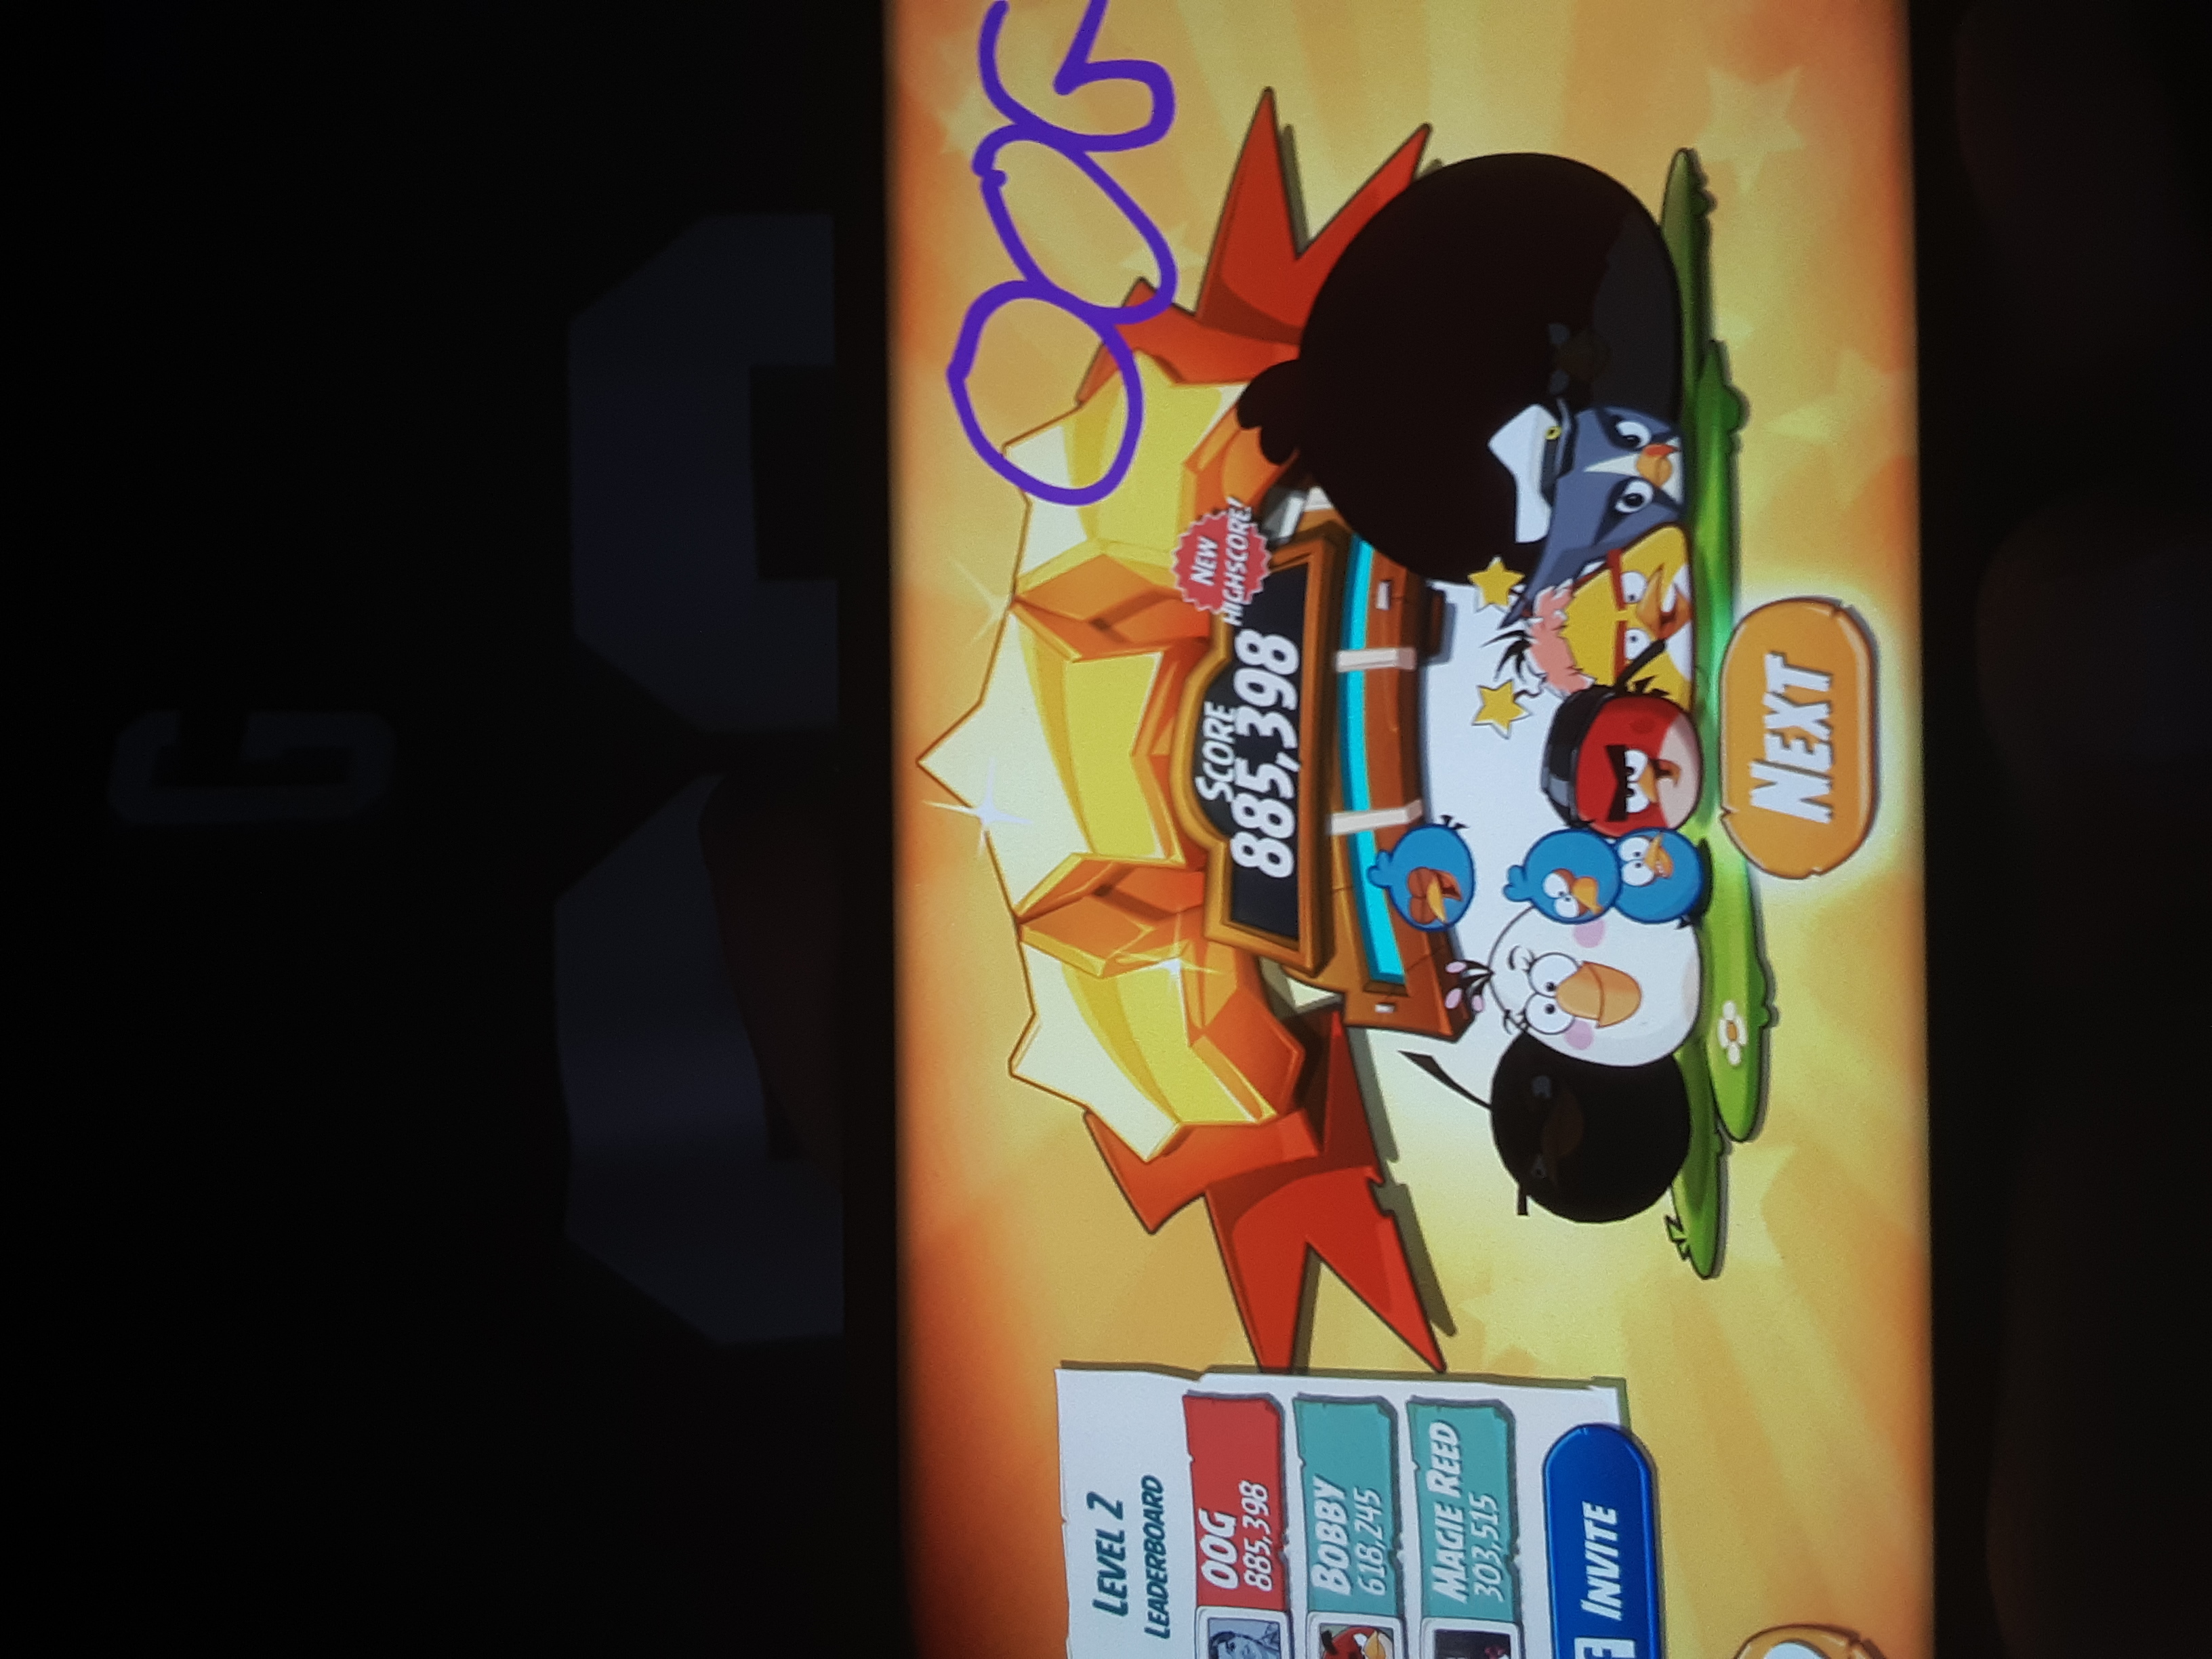 OOG: Angry Birds 2: Level 2 (Android) 885,398 points on 2019-05-15 15:12:05